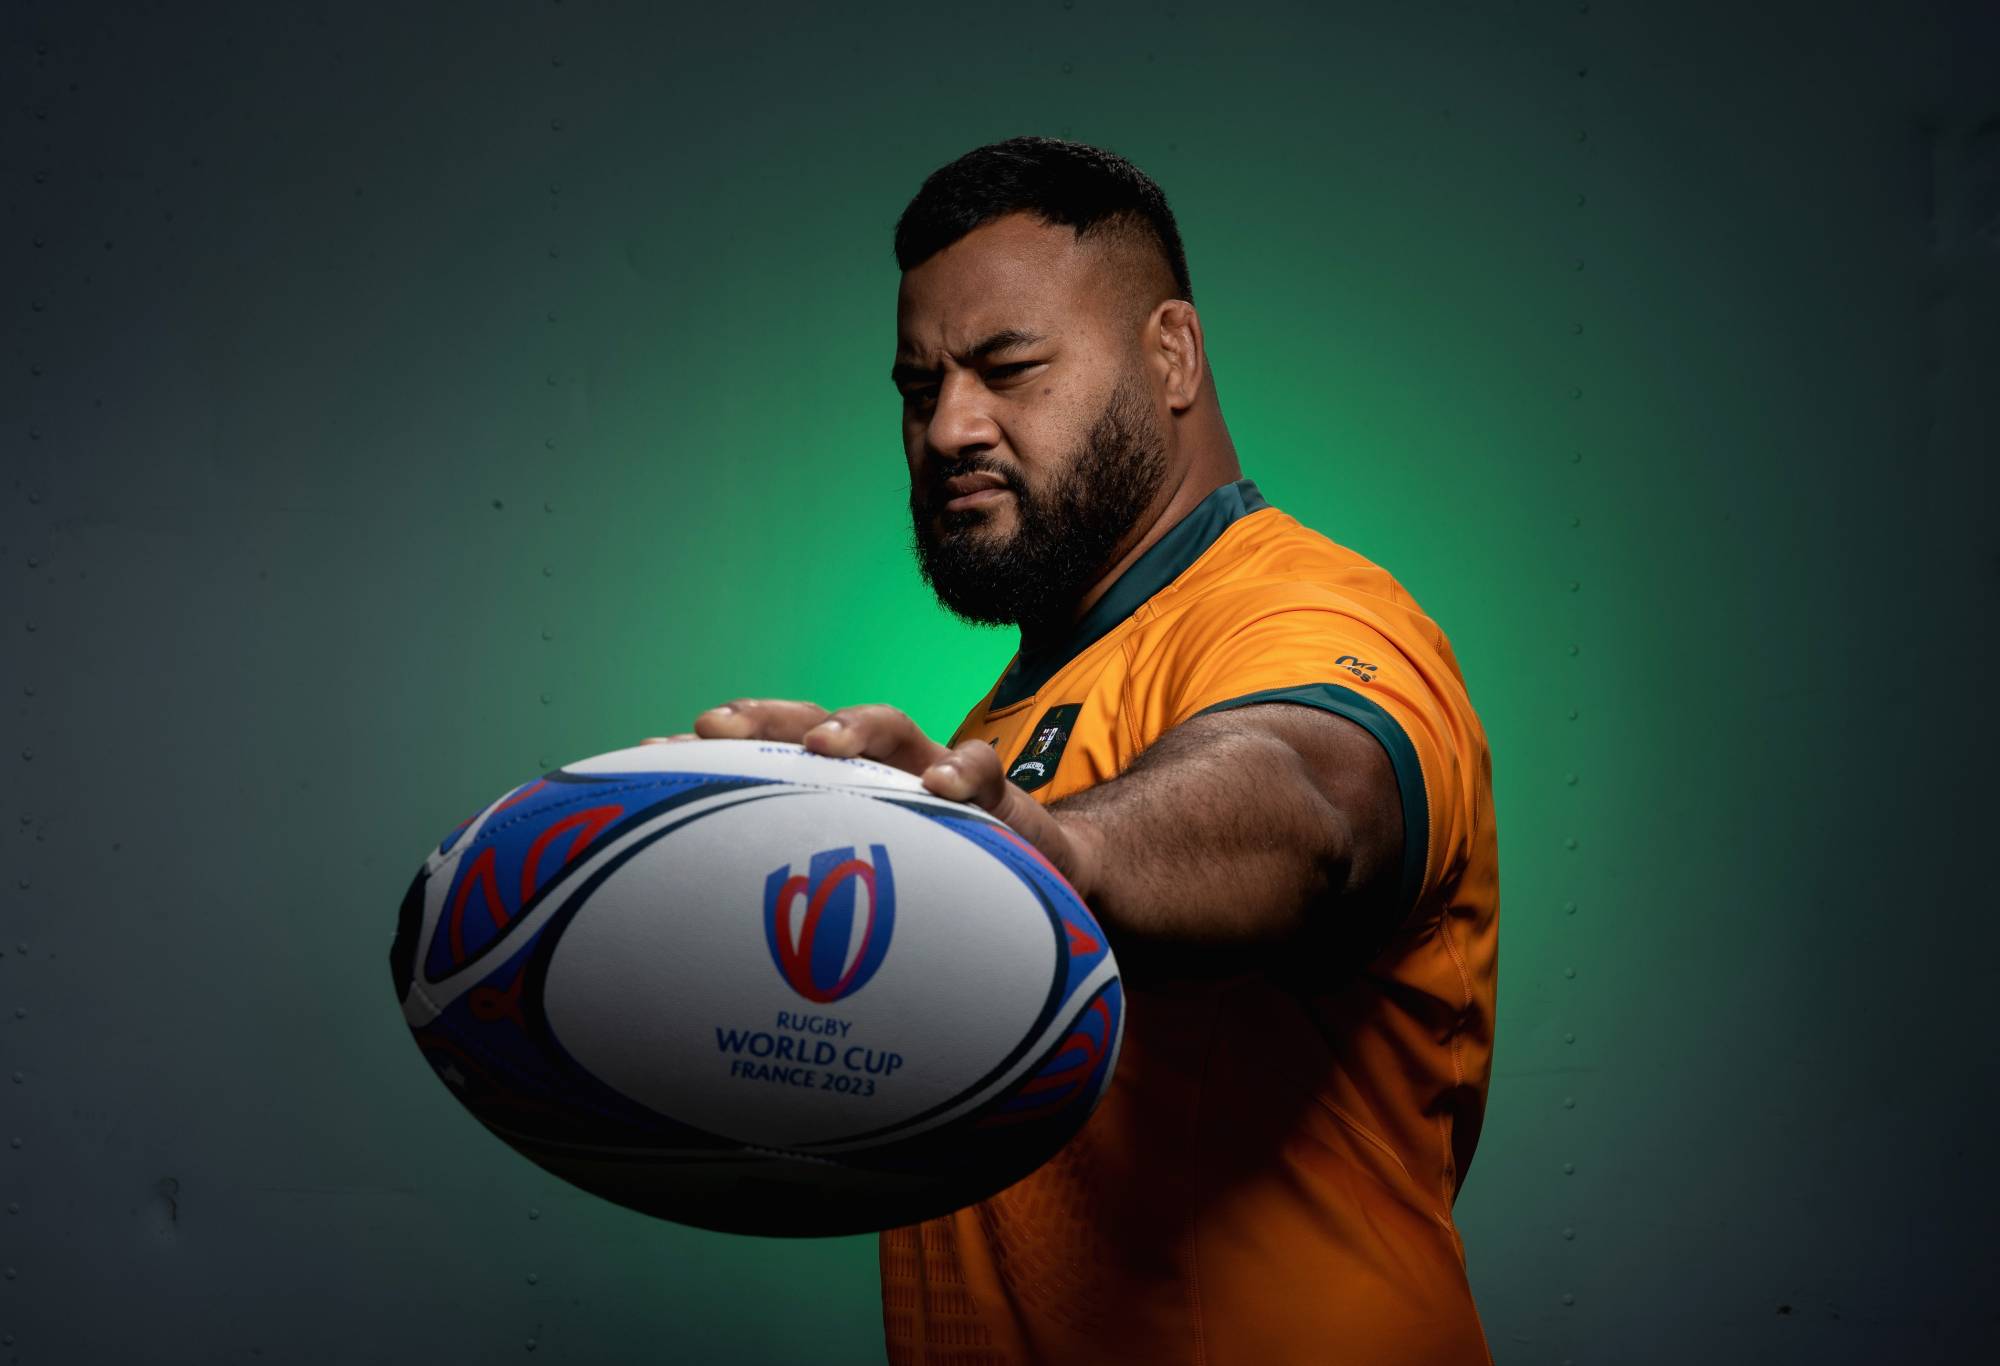 Taniela Tupou of the Wallabies poses during a Rugby Australia media opportunity launching the Wallabies 2023 Rugby World Cup jersey, at Coogee Oval on June 22, 2023 in Sydney, Australia. (Photo by Cameron Spencer/Getty Images)